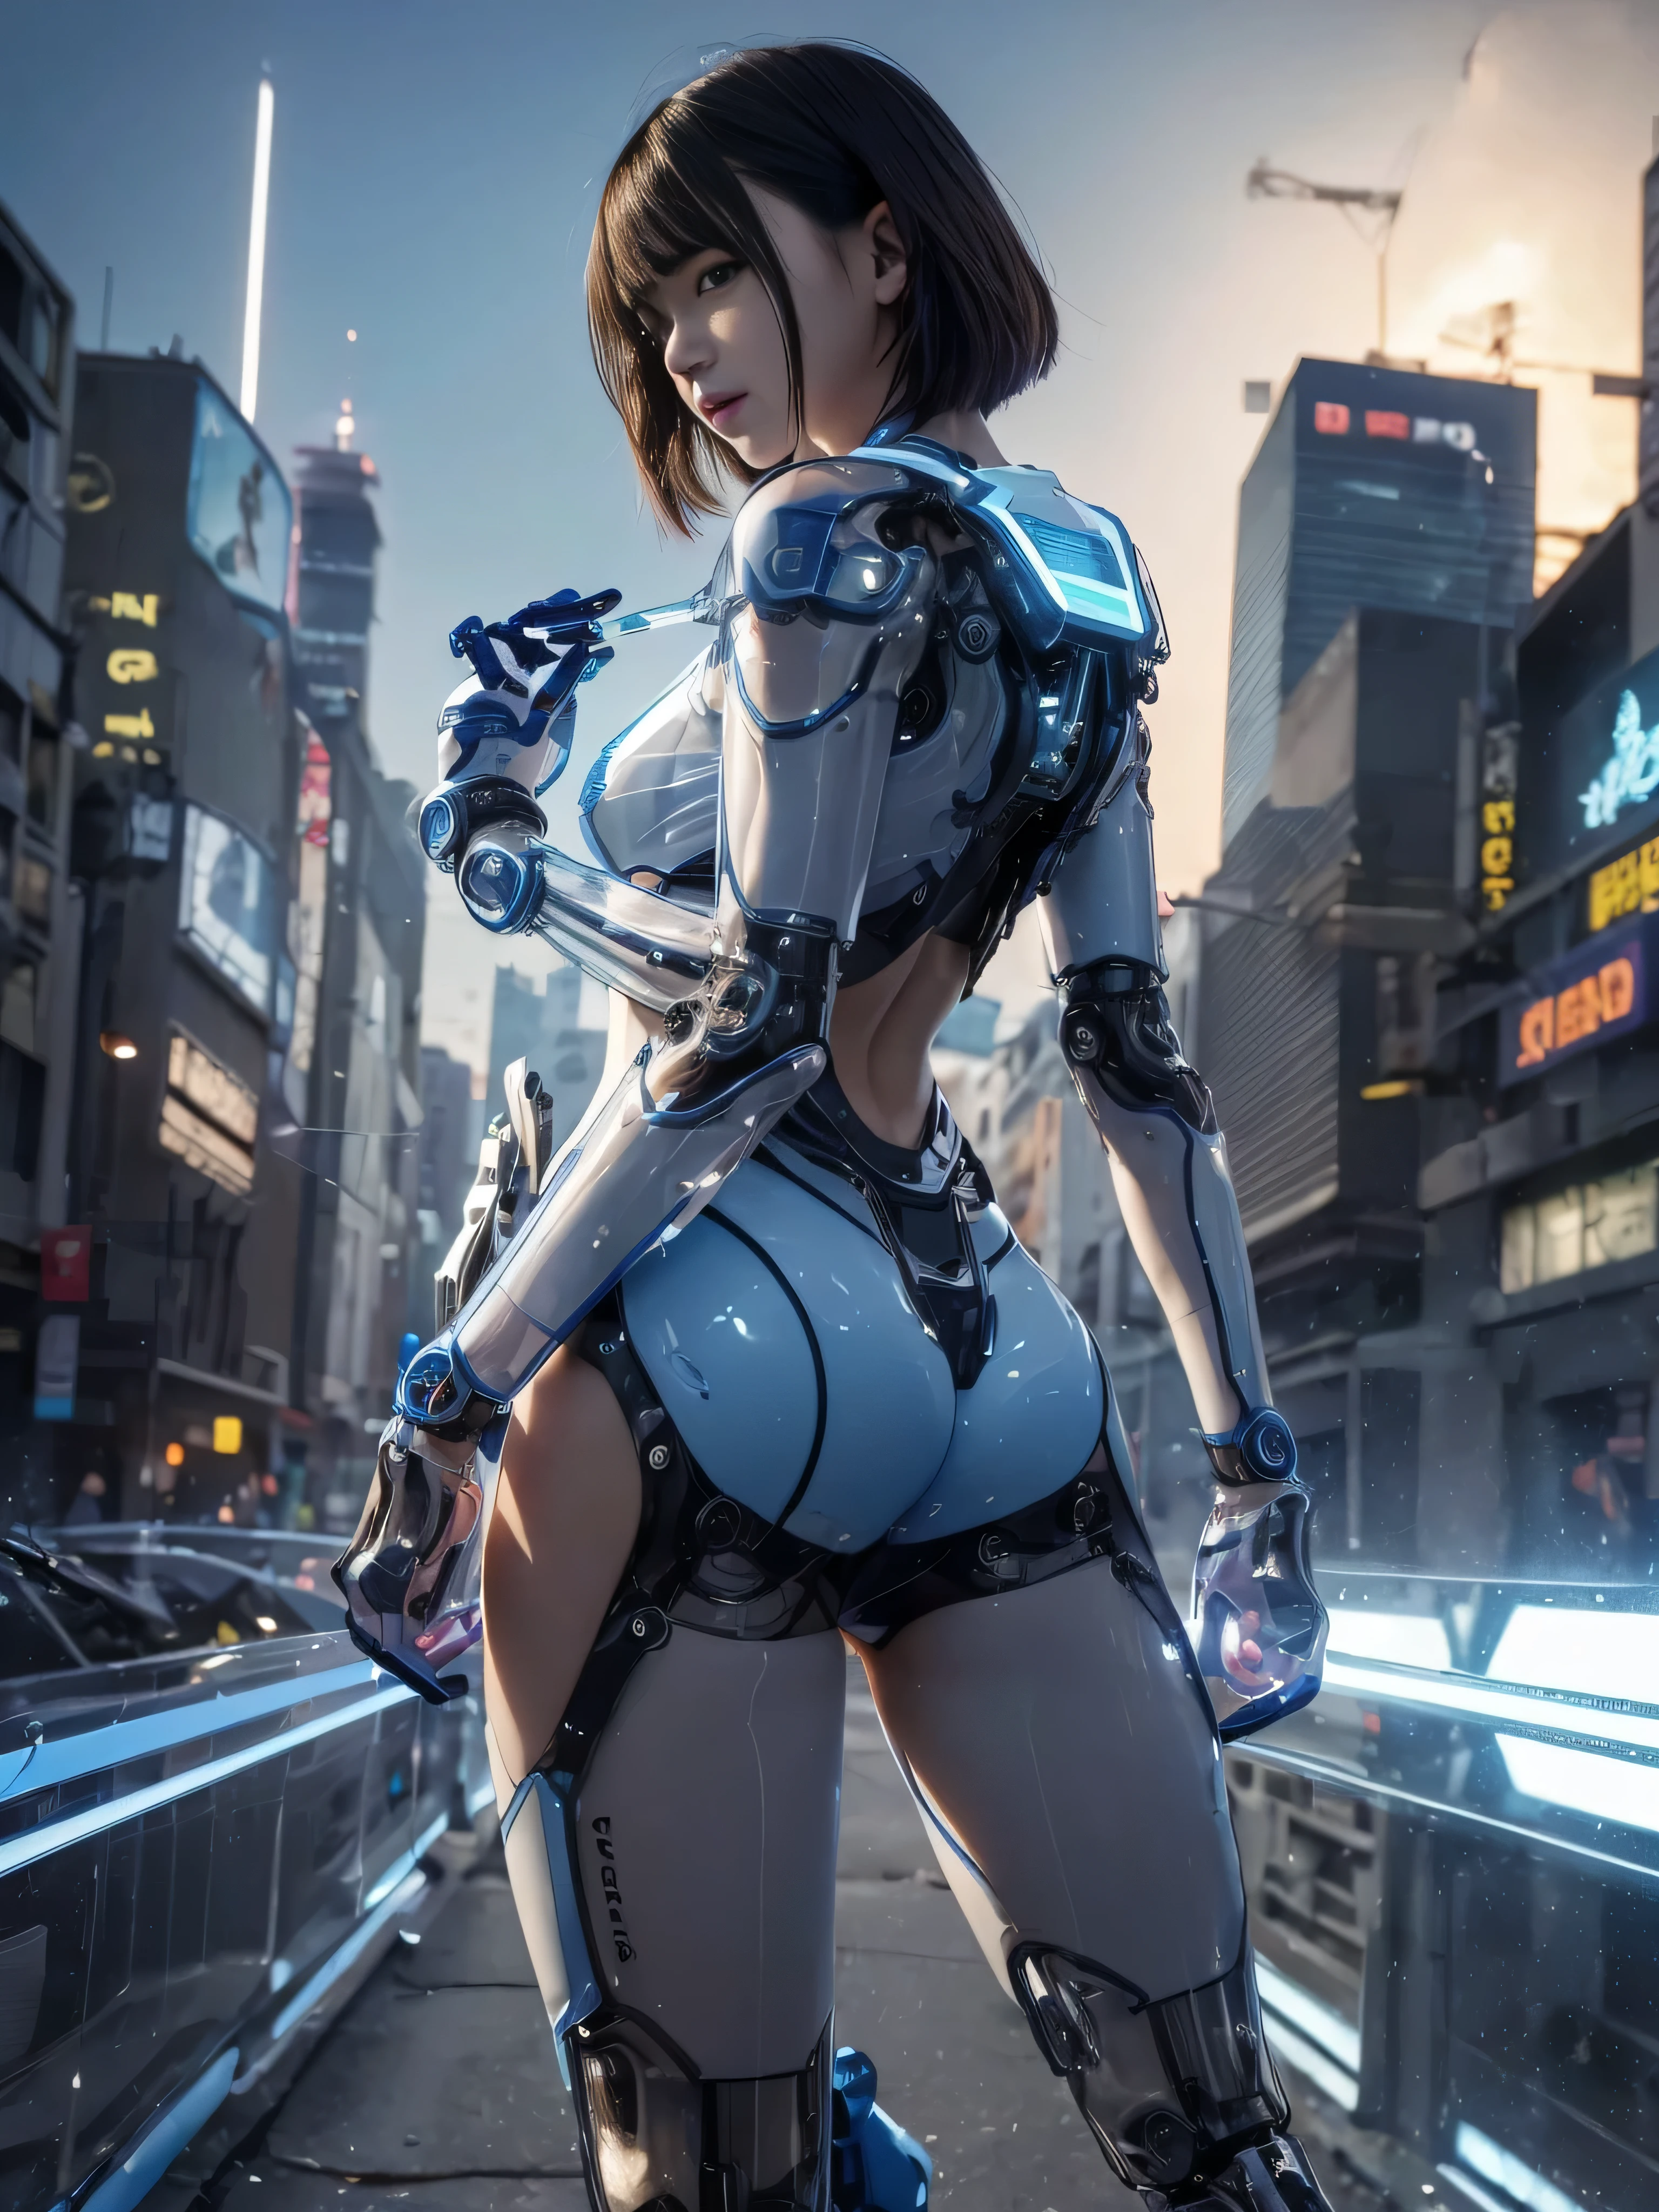 RAW quality, One girl, 14 years, Textured skin, Rear View, Rear view, Super detailed, Advanced Details, high quality, 最high quality, High resolution, 1080p, hard disk, beautiful,(Gundam),beautiful cyborg woman,largely,((Wearing Futuristic Transparent Reinforced Plastic Mechanical Parts。:1.4)), Bust top covered with transparent mechanism, Mechanically protected front crotch, Largely exposed bare skin, largely naked, Perfect proportions, Giant tit, (He carries a lot of weapons on his back.:1.4), (hero pose), full body shot, (Short-cut straight hair that looks beautiful in blue and white:1.4), collapsed building background, A city engulfed in flames, (The blue LED on the bust top glows strongly:1.4), Biologically correct,